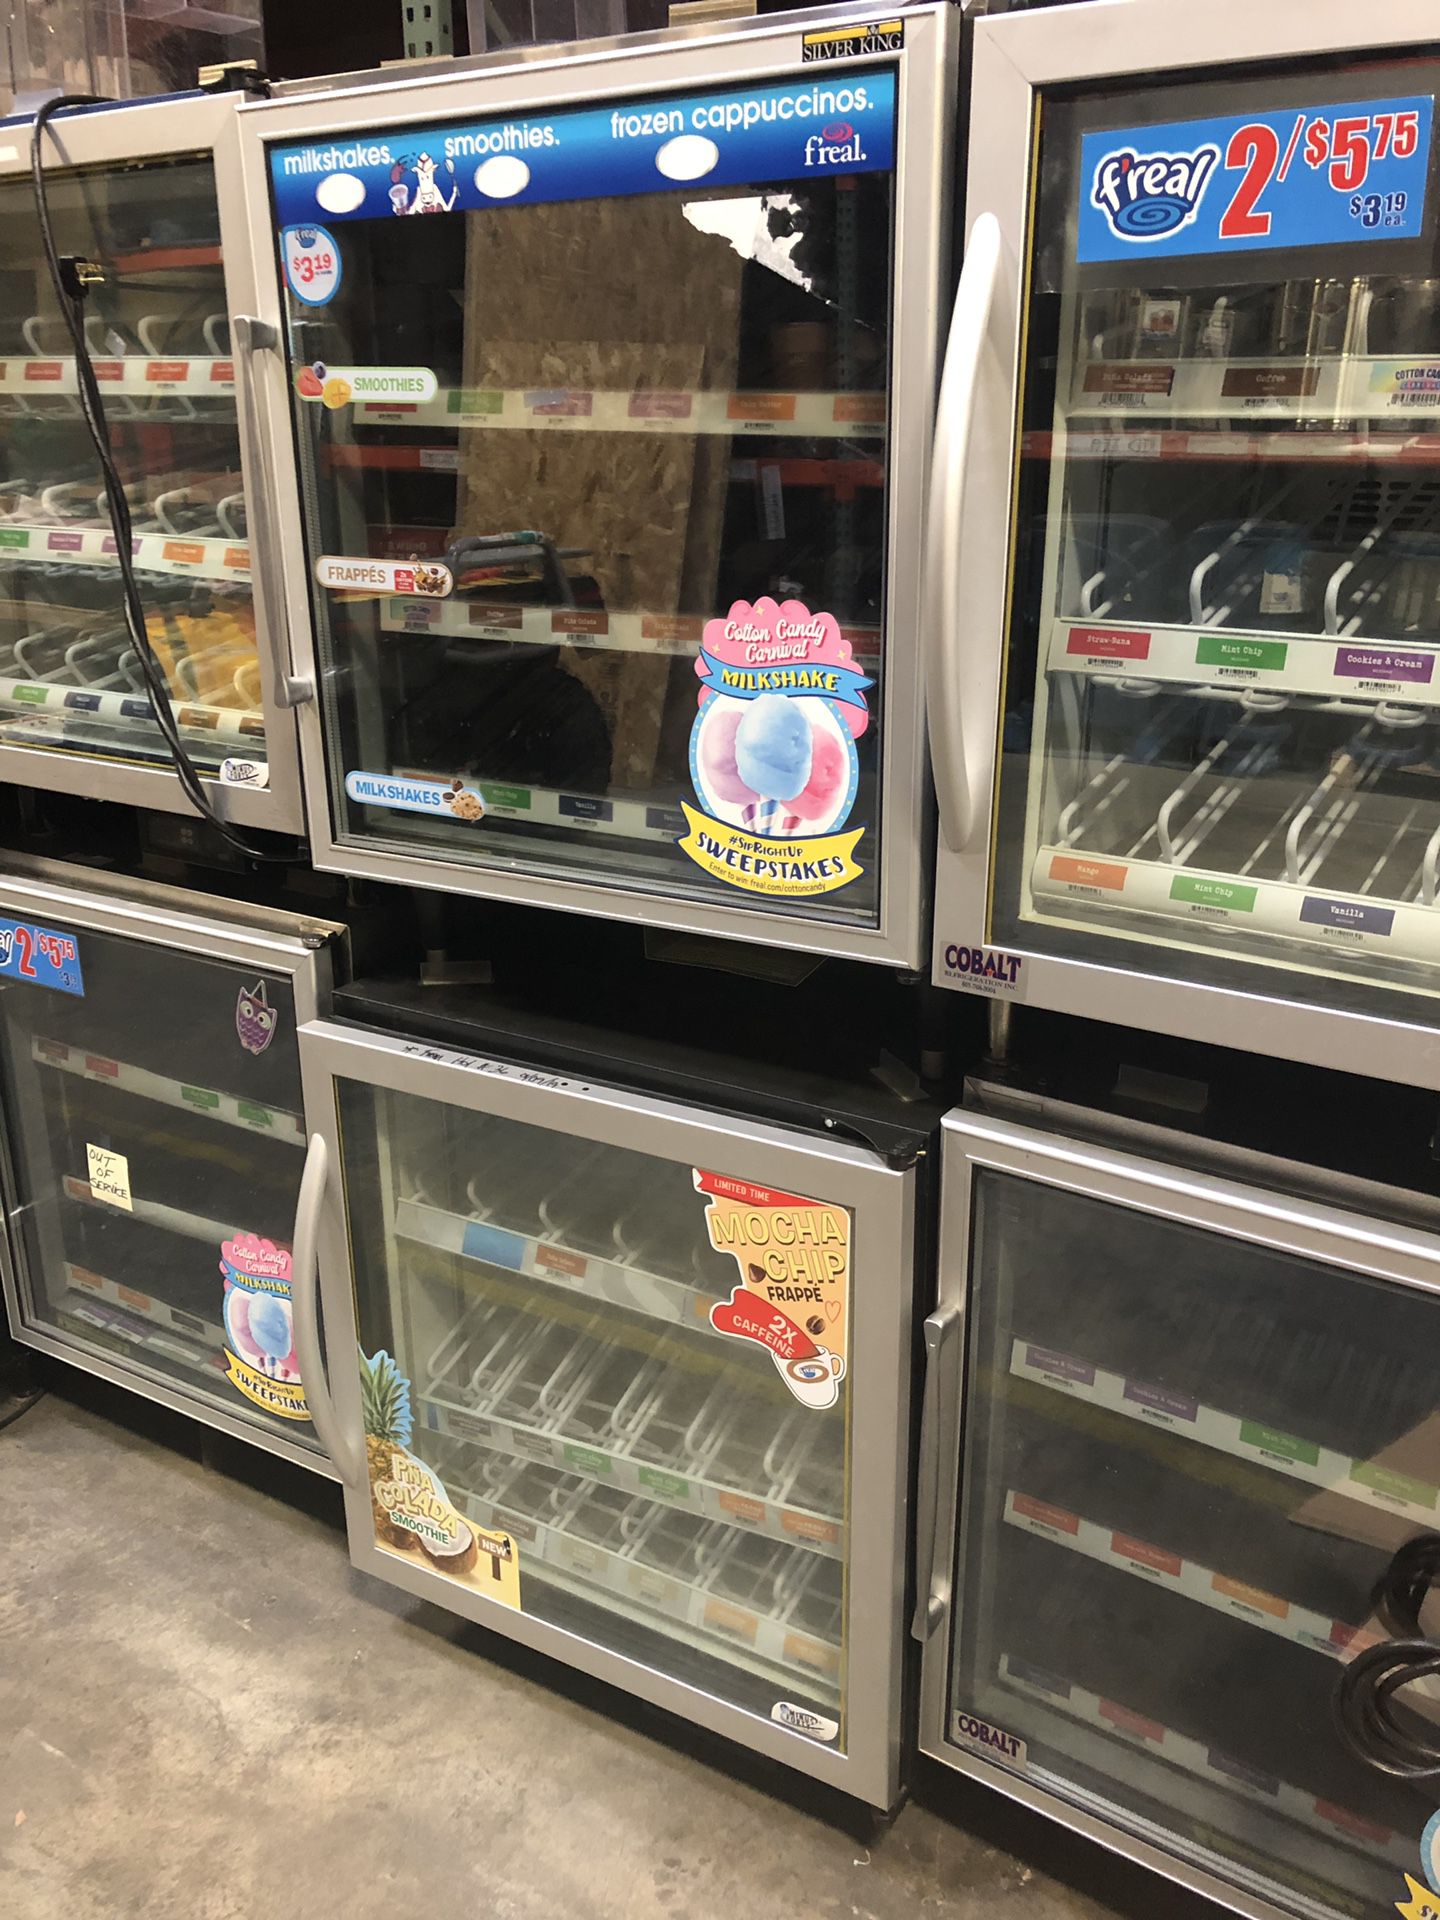 Minus Forty & Silver King F’real Commercial Freezers